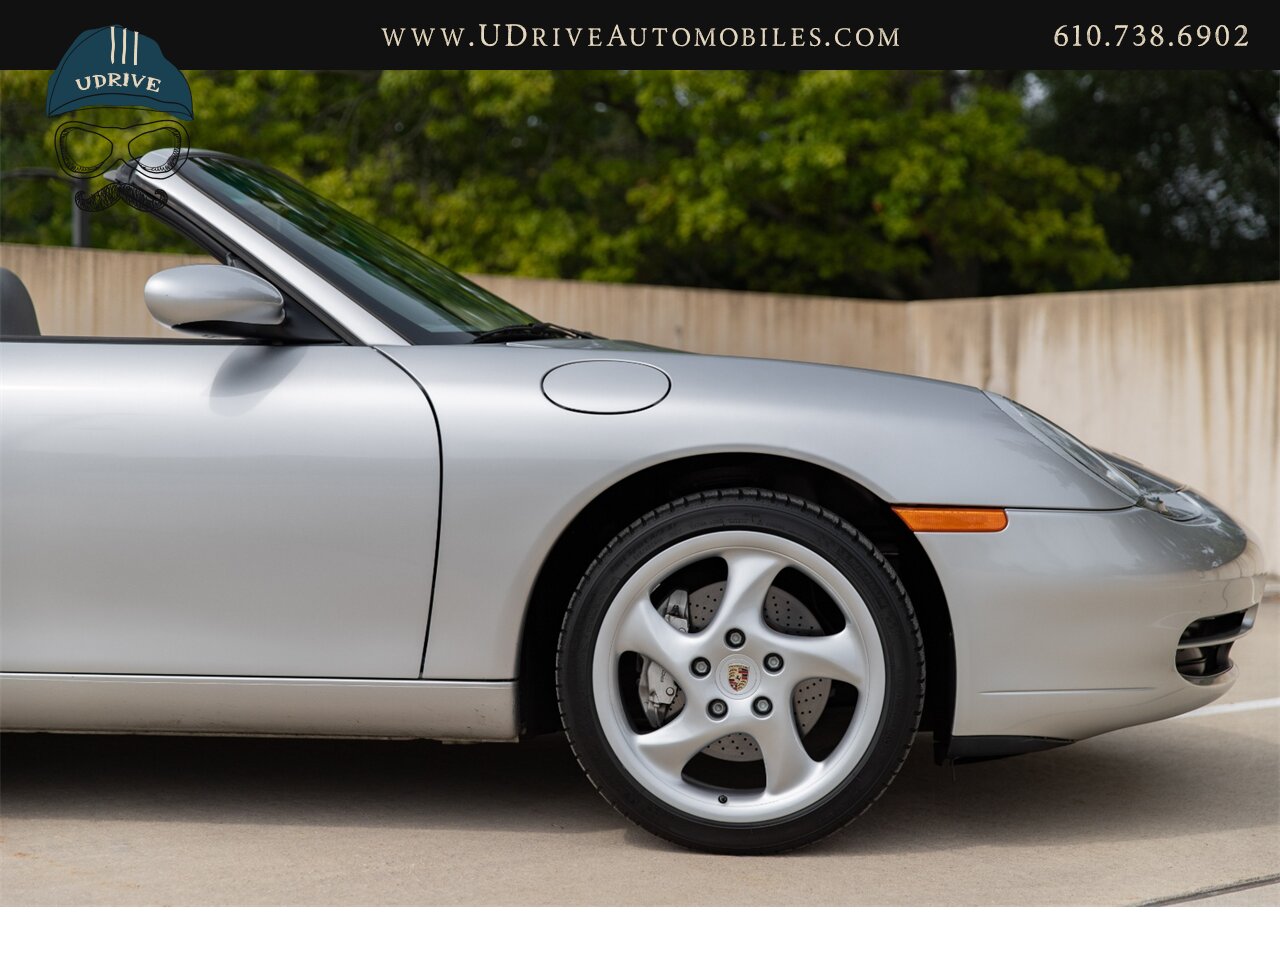 2001 Porsche 911 Carrera 4 Cabriolet Tiptronic IMS Upgrade  Power Seats 18in Turbo Look Wheels 2 Owners $5k Recent Service - Photo 18 - West Chester, PA 19382